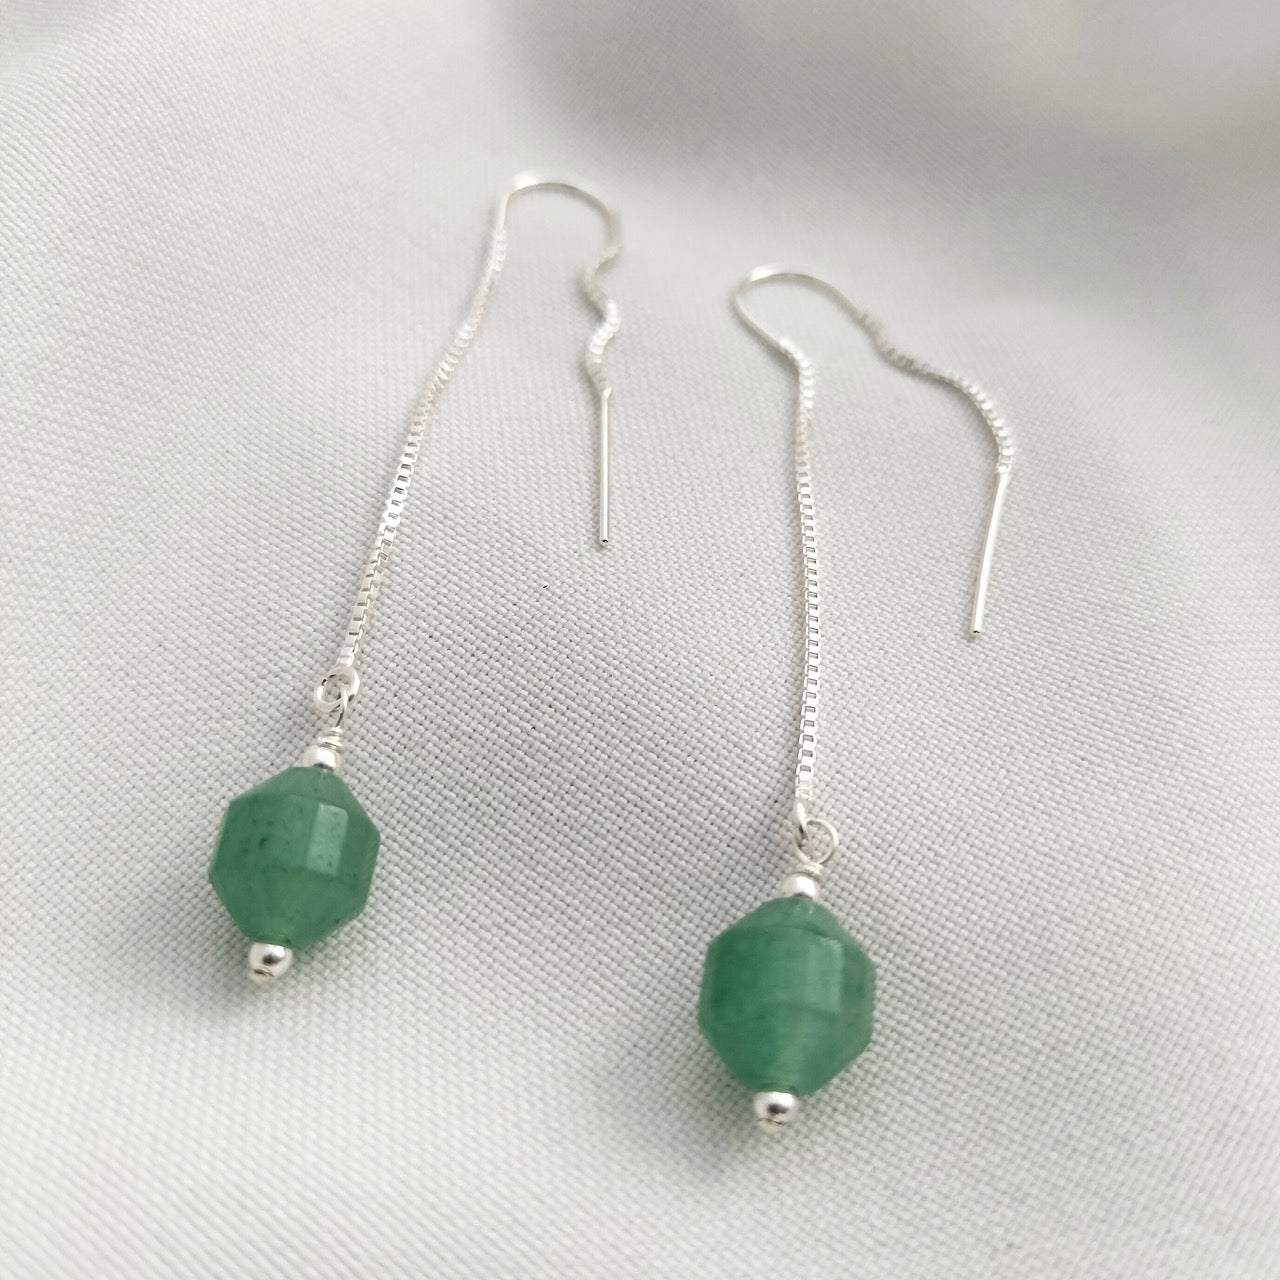 sterling silver ear threaders with green beads